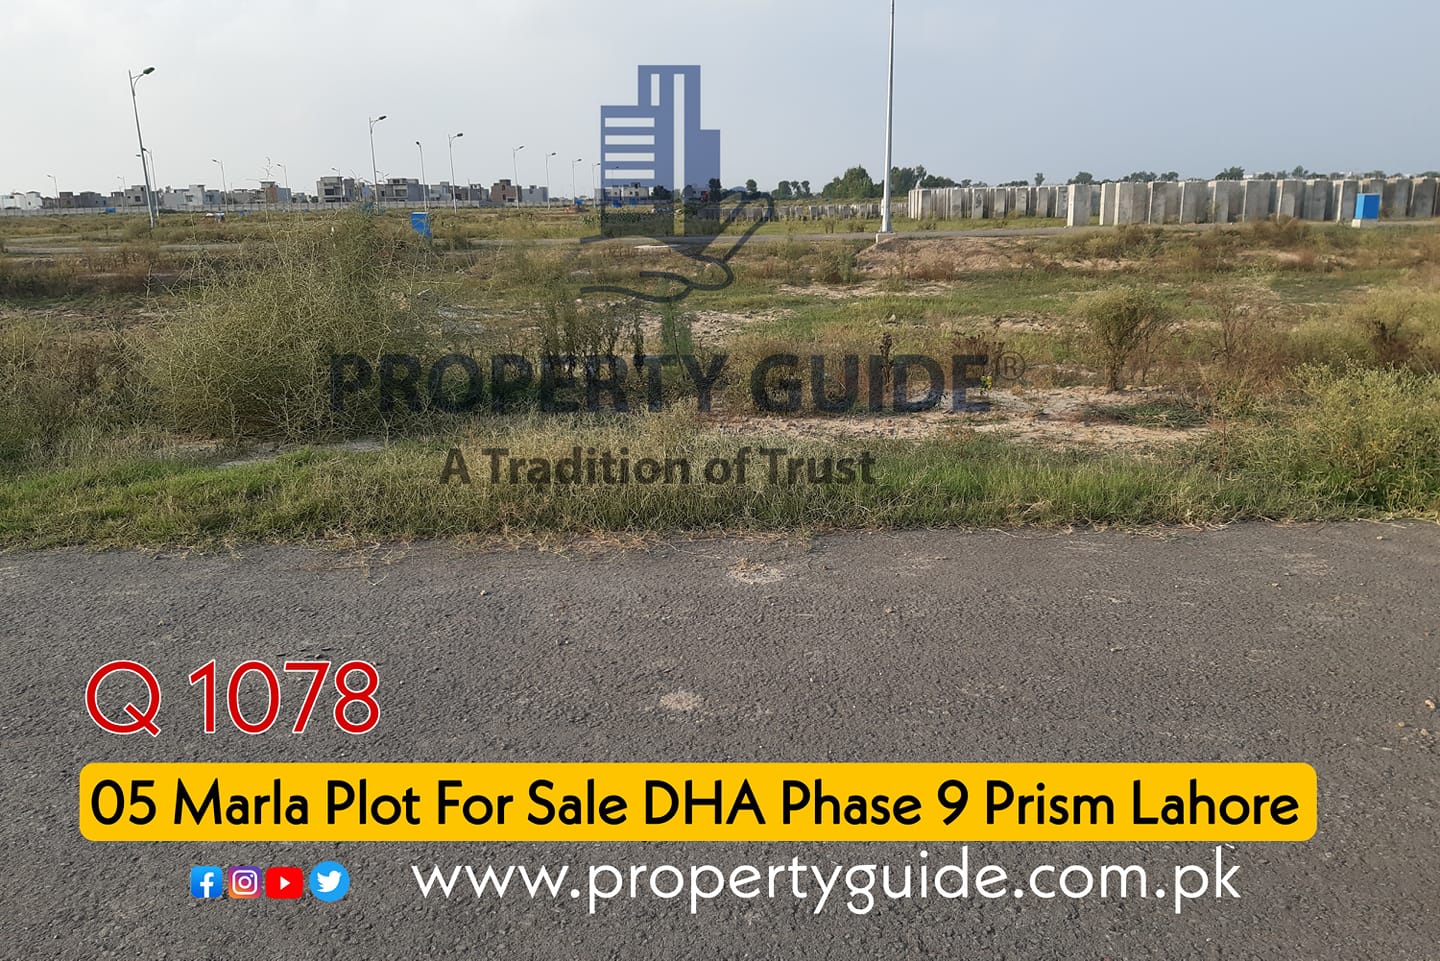 05 Marla Plot For Sale In DHA Phase 9 Prism Lahore – Q Block 1078